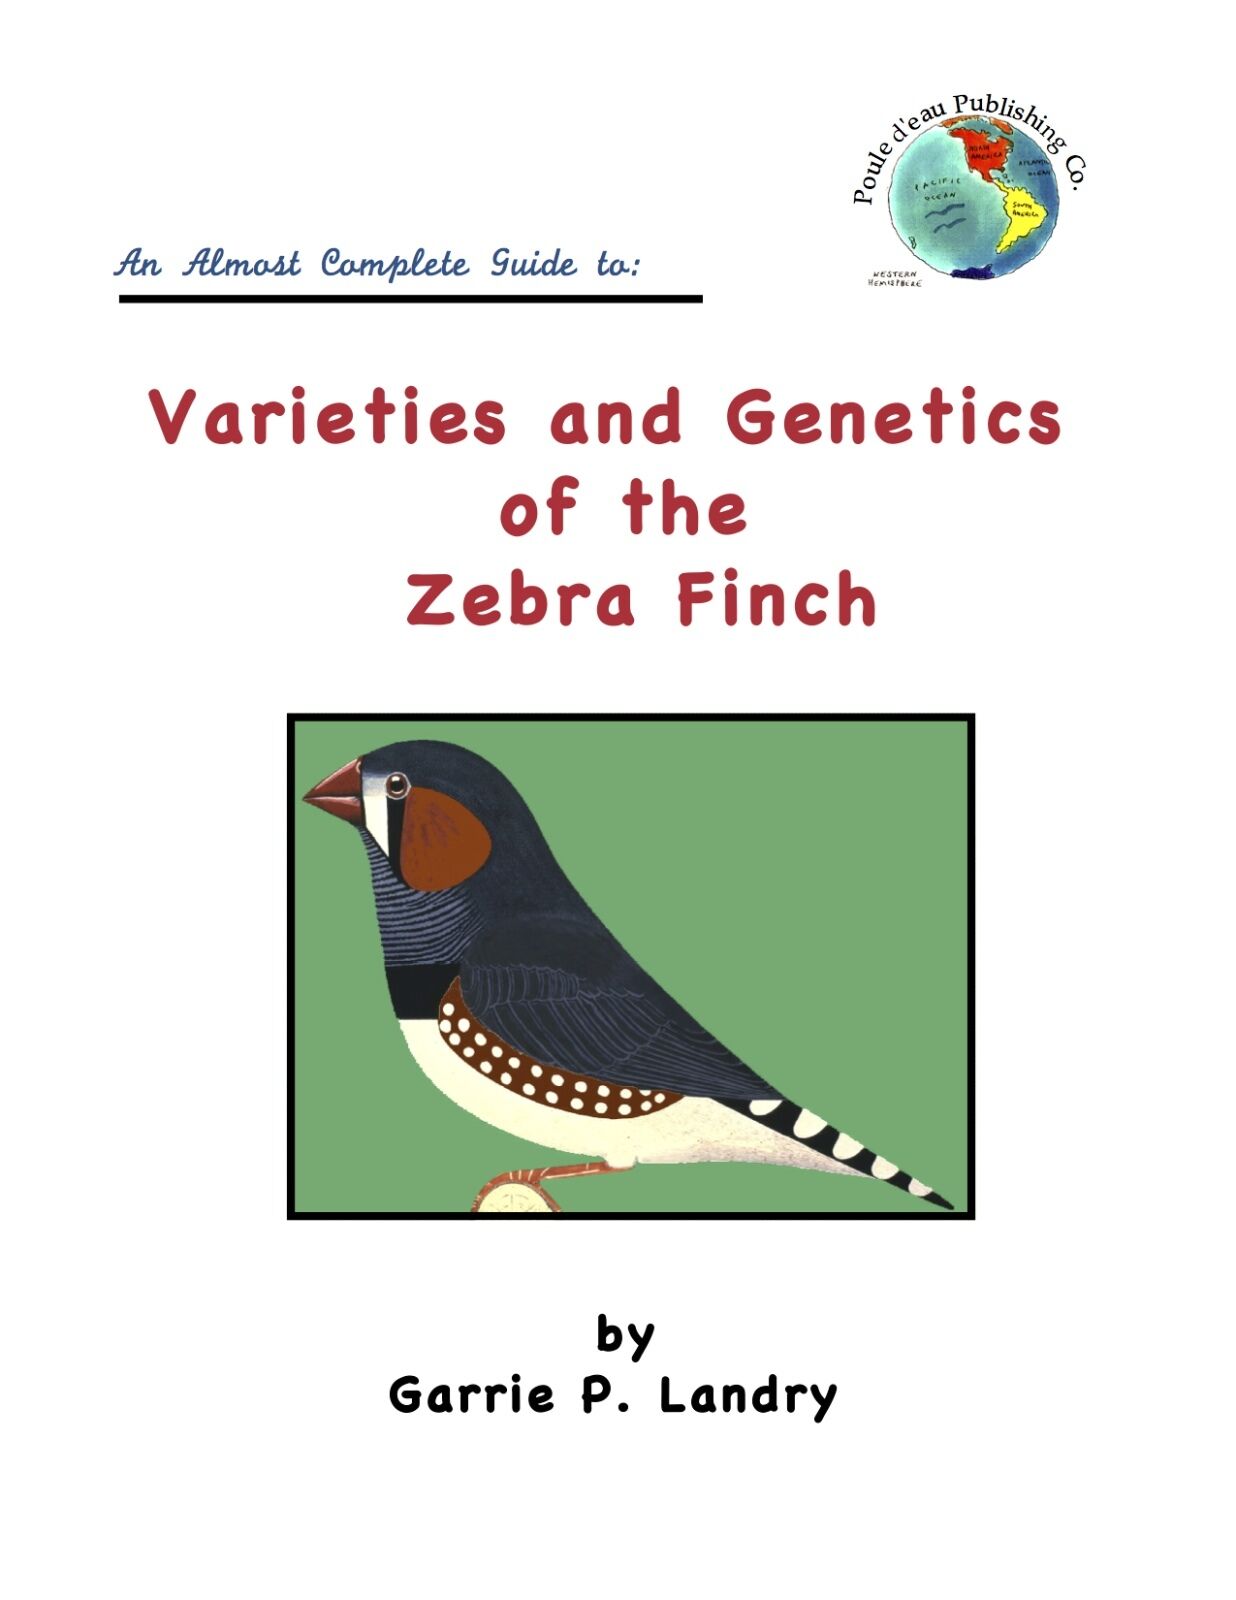 Varieties and Genetic of Zebra Finches  A genetics book made VERY EASY